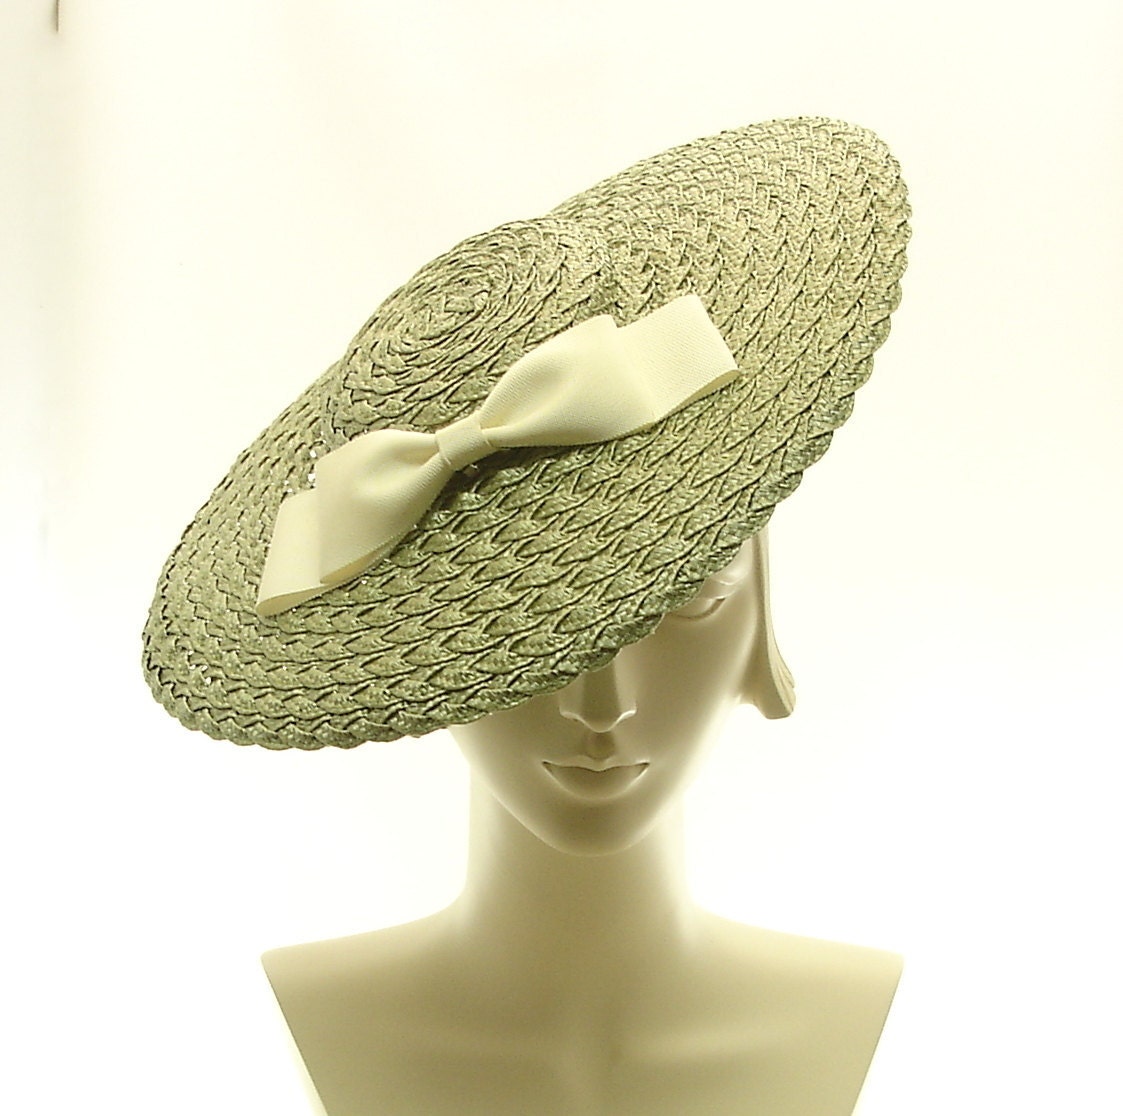 Straw Saucer Hat - Boater Hat for Women - 1920s Fashion Hat - Sage Green - Ivory Grosgrain Ribbon Bow